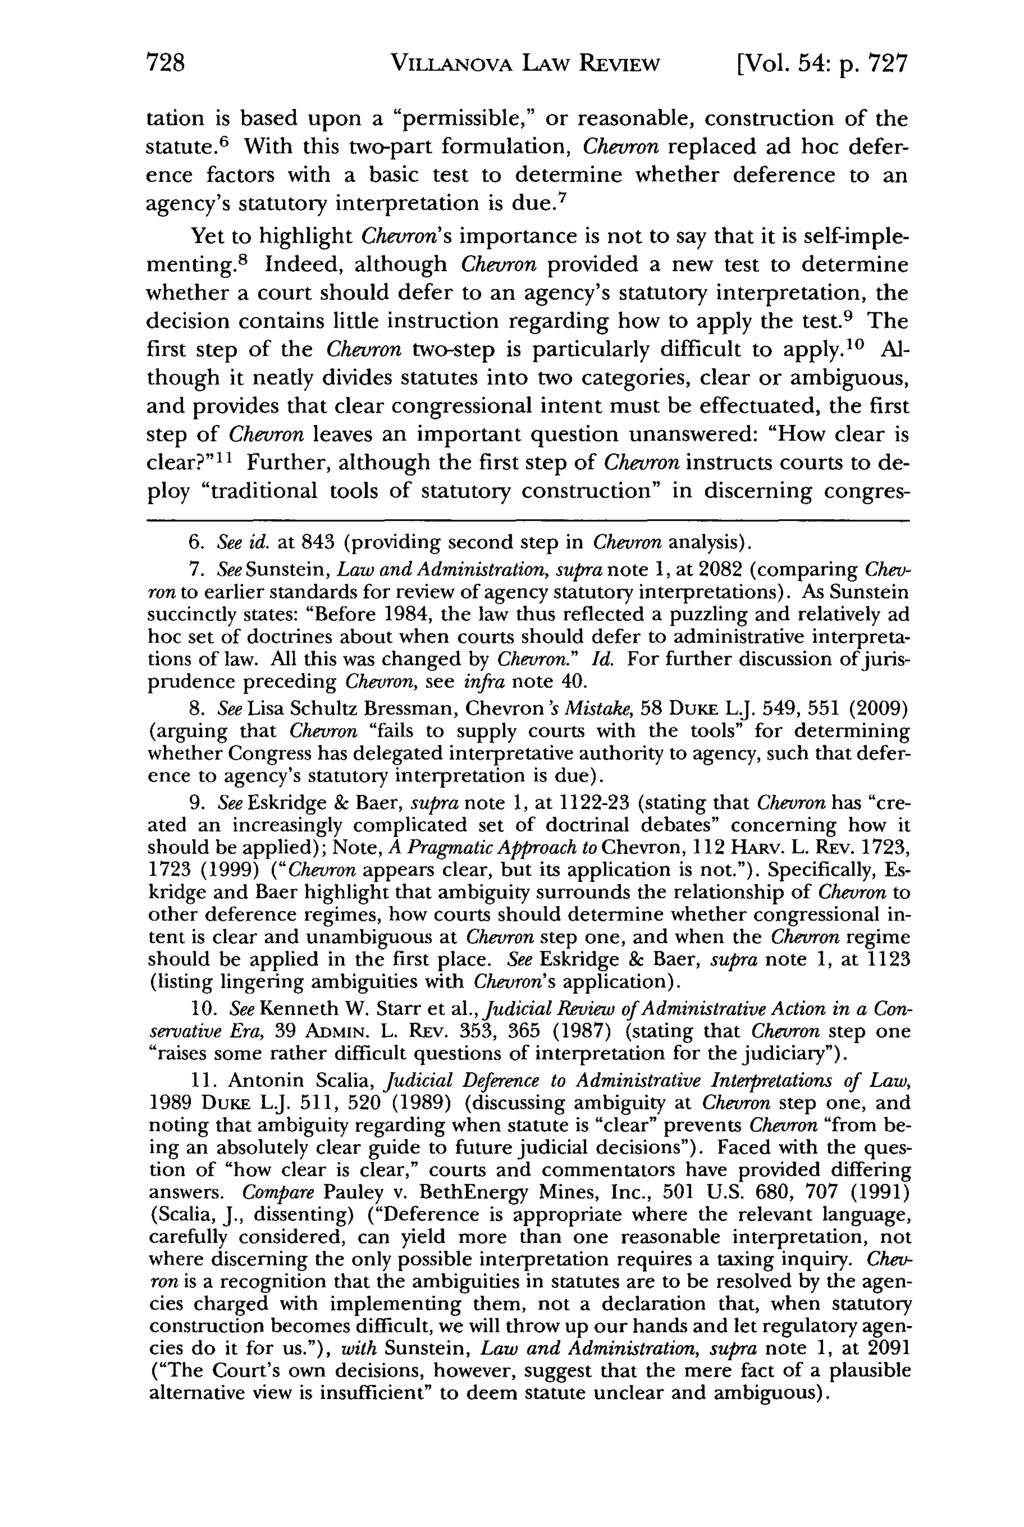 Villanova VILLANovA Law Review, Vol. LAW 54, Iss. REVIEW 5 [2009], Art. 2 [Vol. 54: p. 727 tation is based upon a "permissible," or reasonable, construction of the statute.